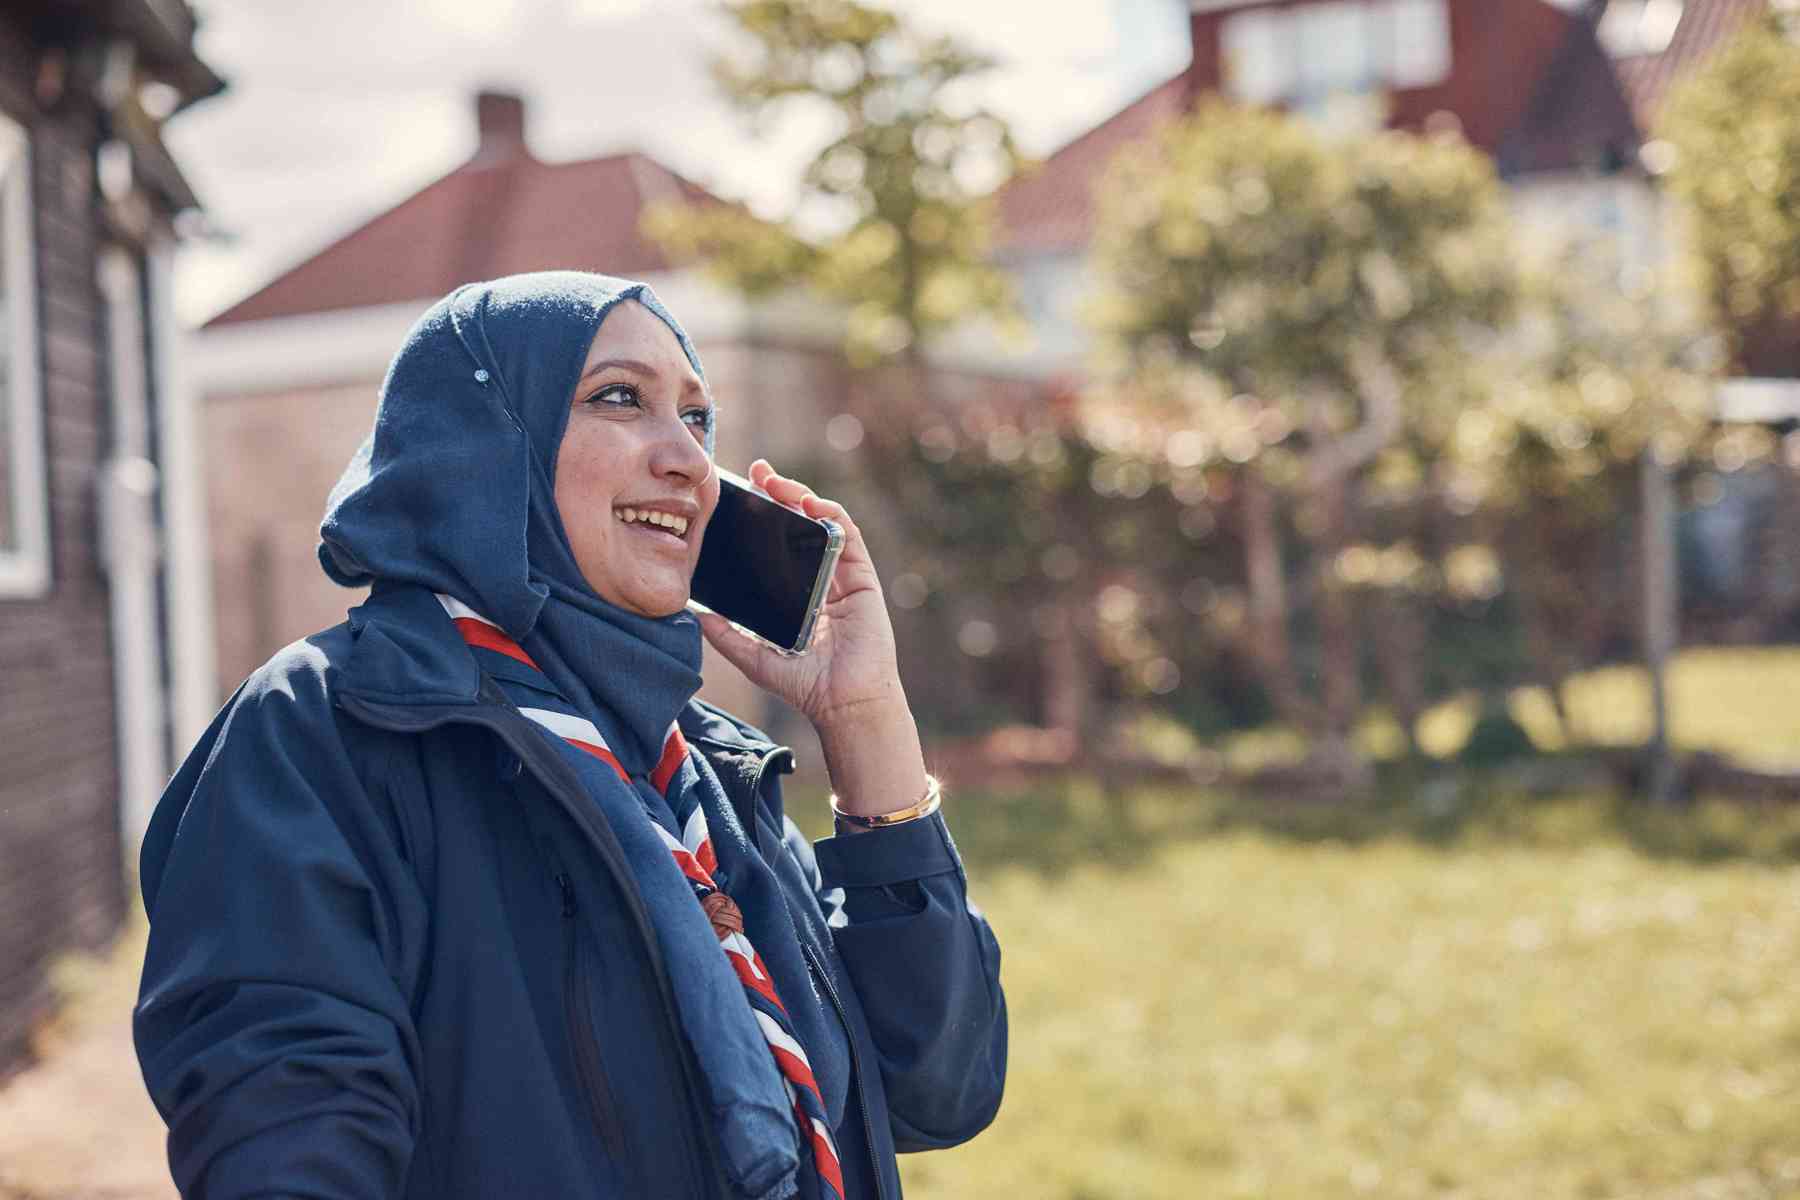 A Squirrels leader, wearing a red, white and blue scarf, smiles while talking on a mobile phone